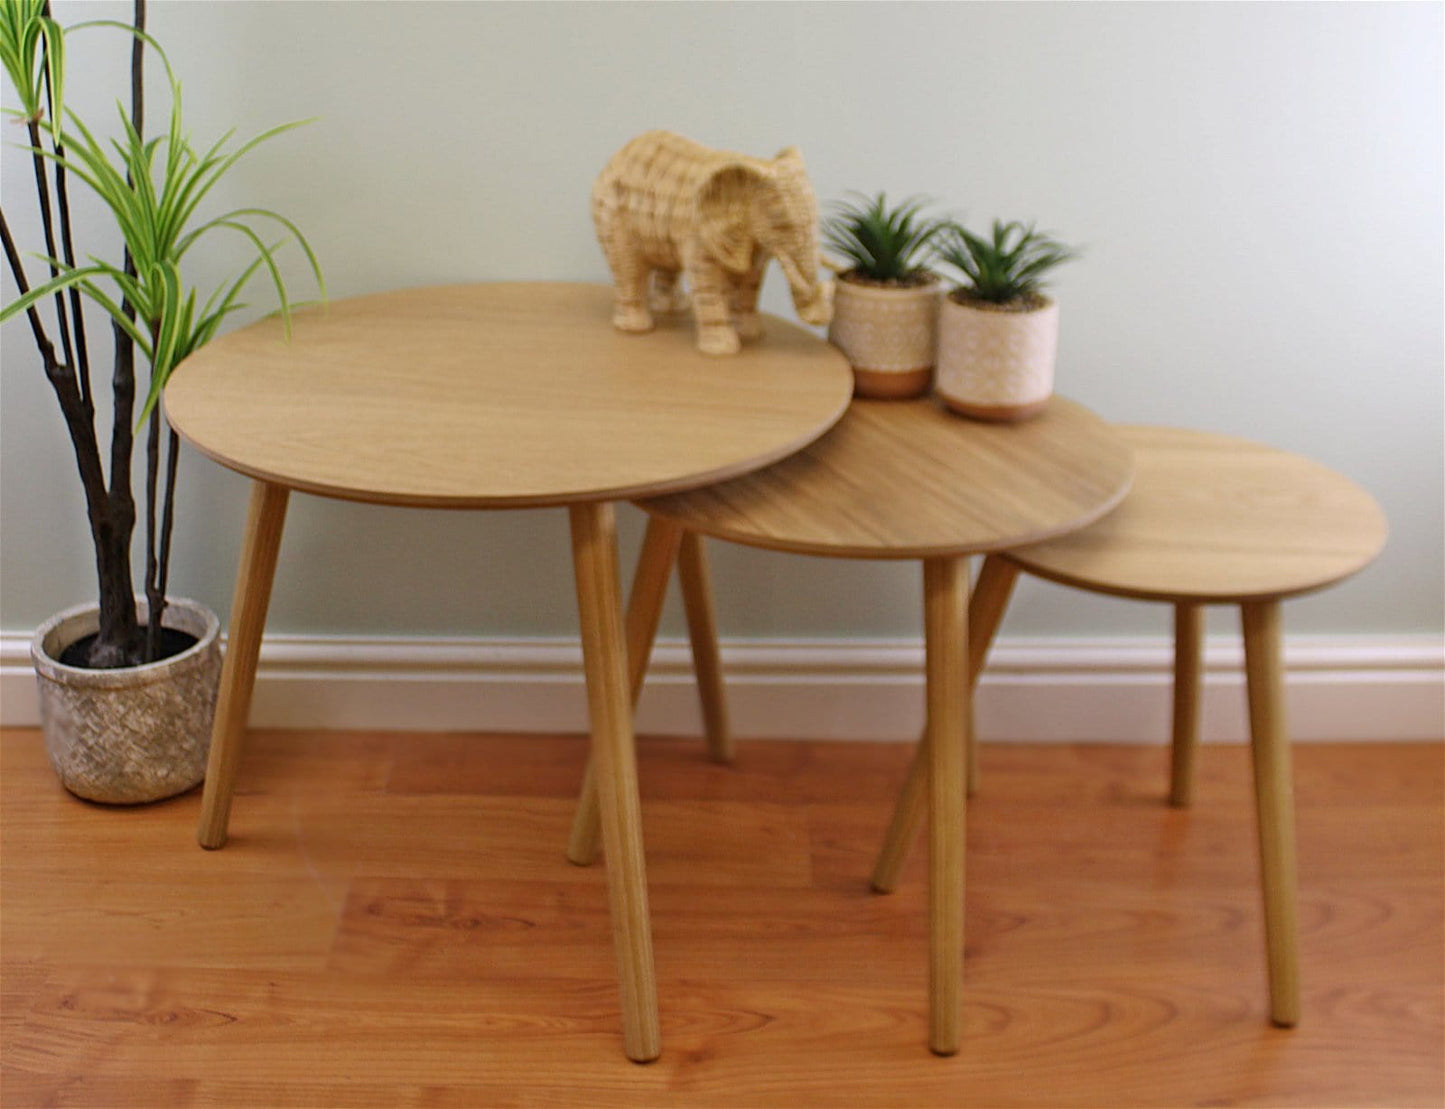 Set of 3 Round Nest Of Tables, Wooden Finish - Kaftan direct